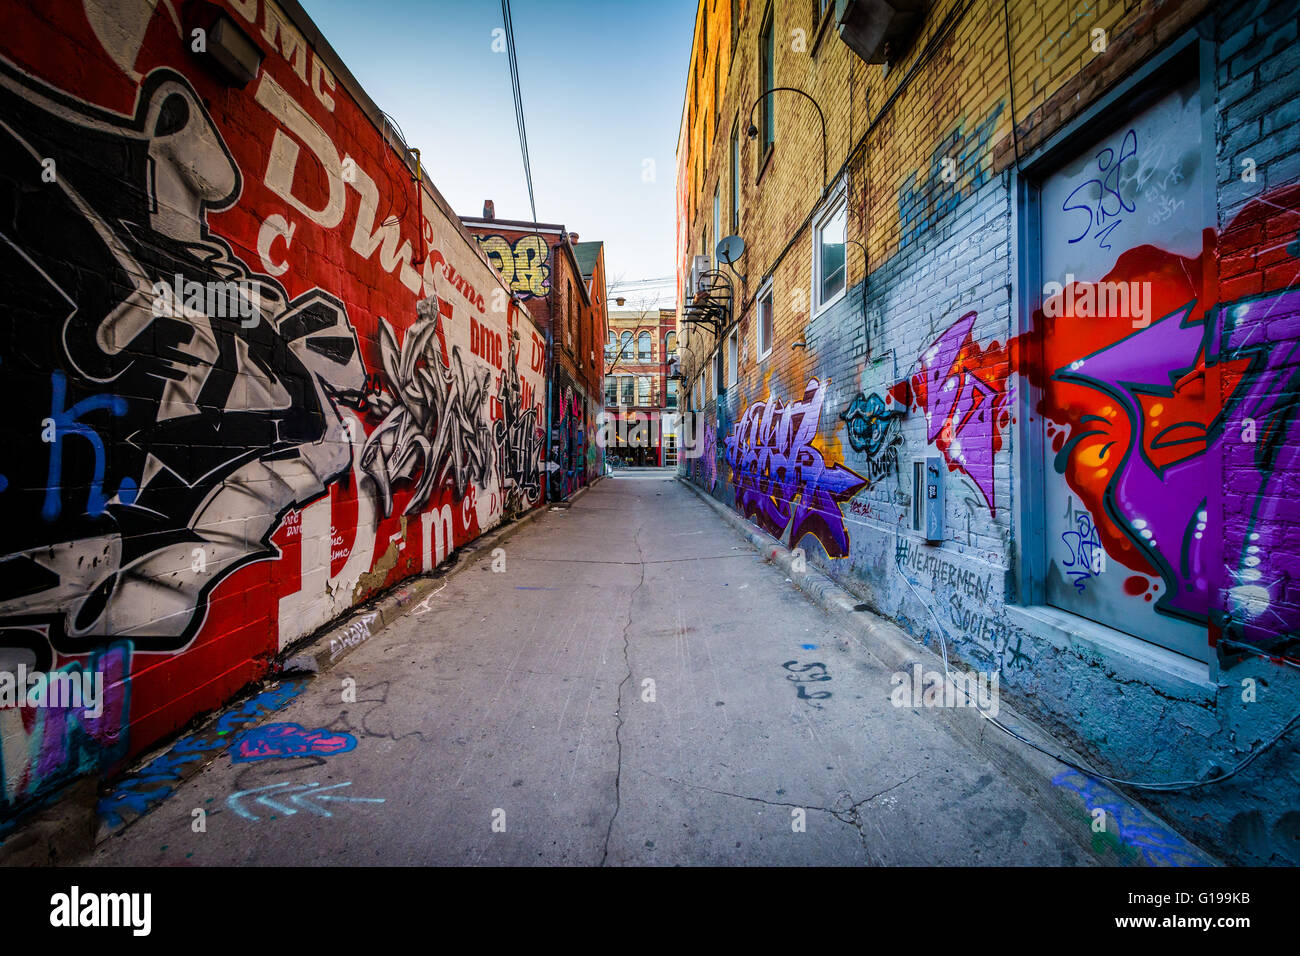 Street art in Graffiti Alley, in the Fashion District of Toronto, Ontario. Stock Photo